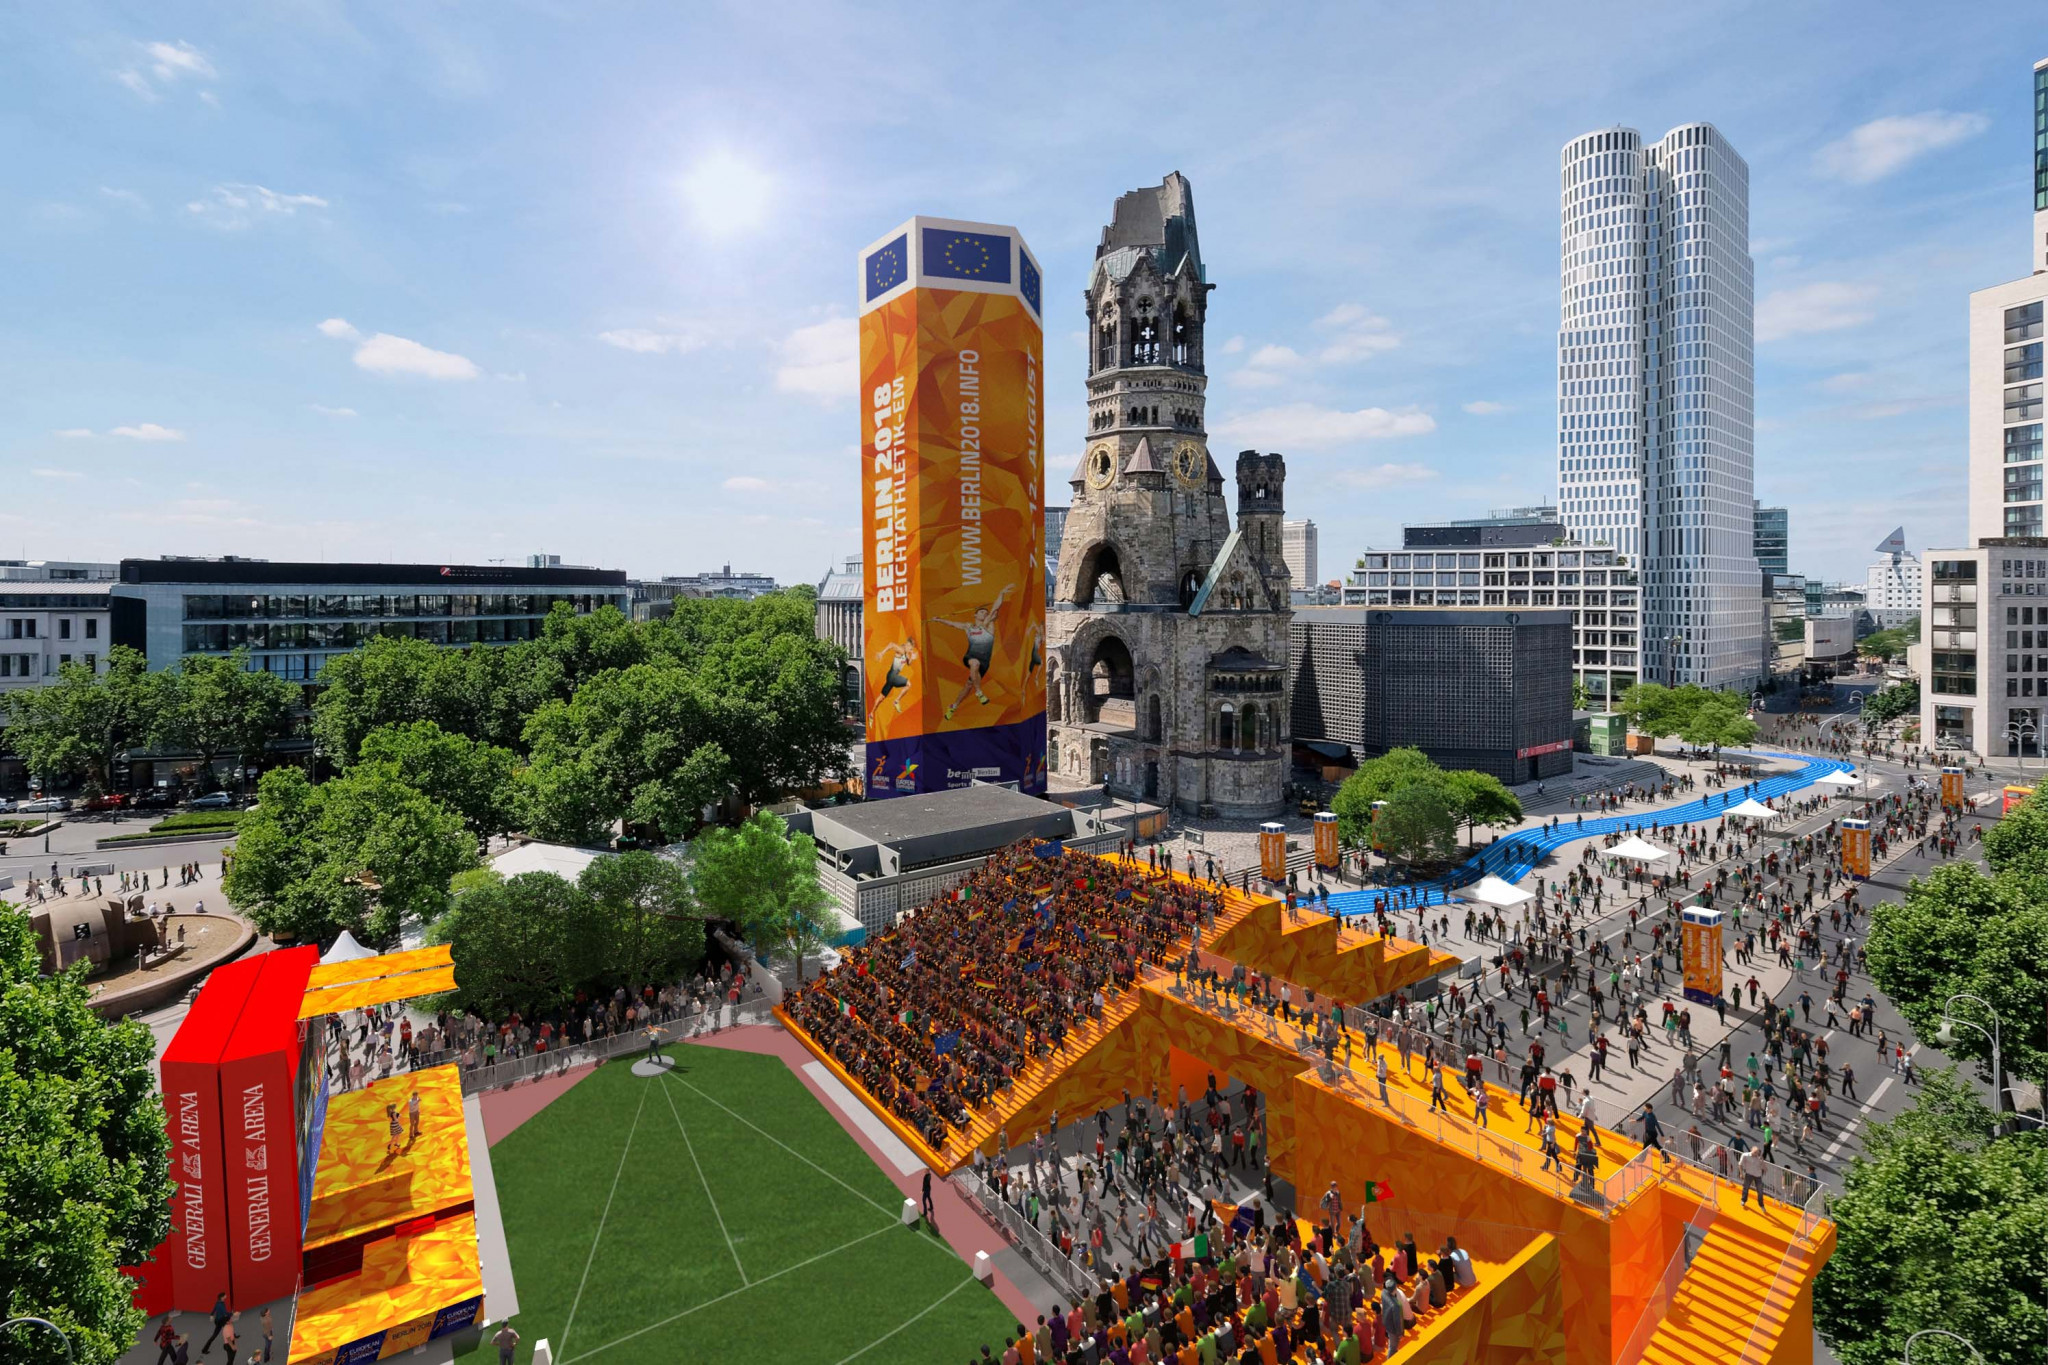 The European Mile at the Breitscheidplatz will host shot put qualifying and the end of the marathon and race walks and all the victory ceremonies during the European Athletics Championships in Berlin ©Berlin 2018 